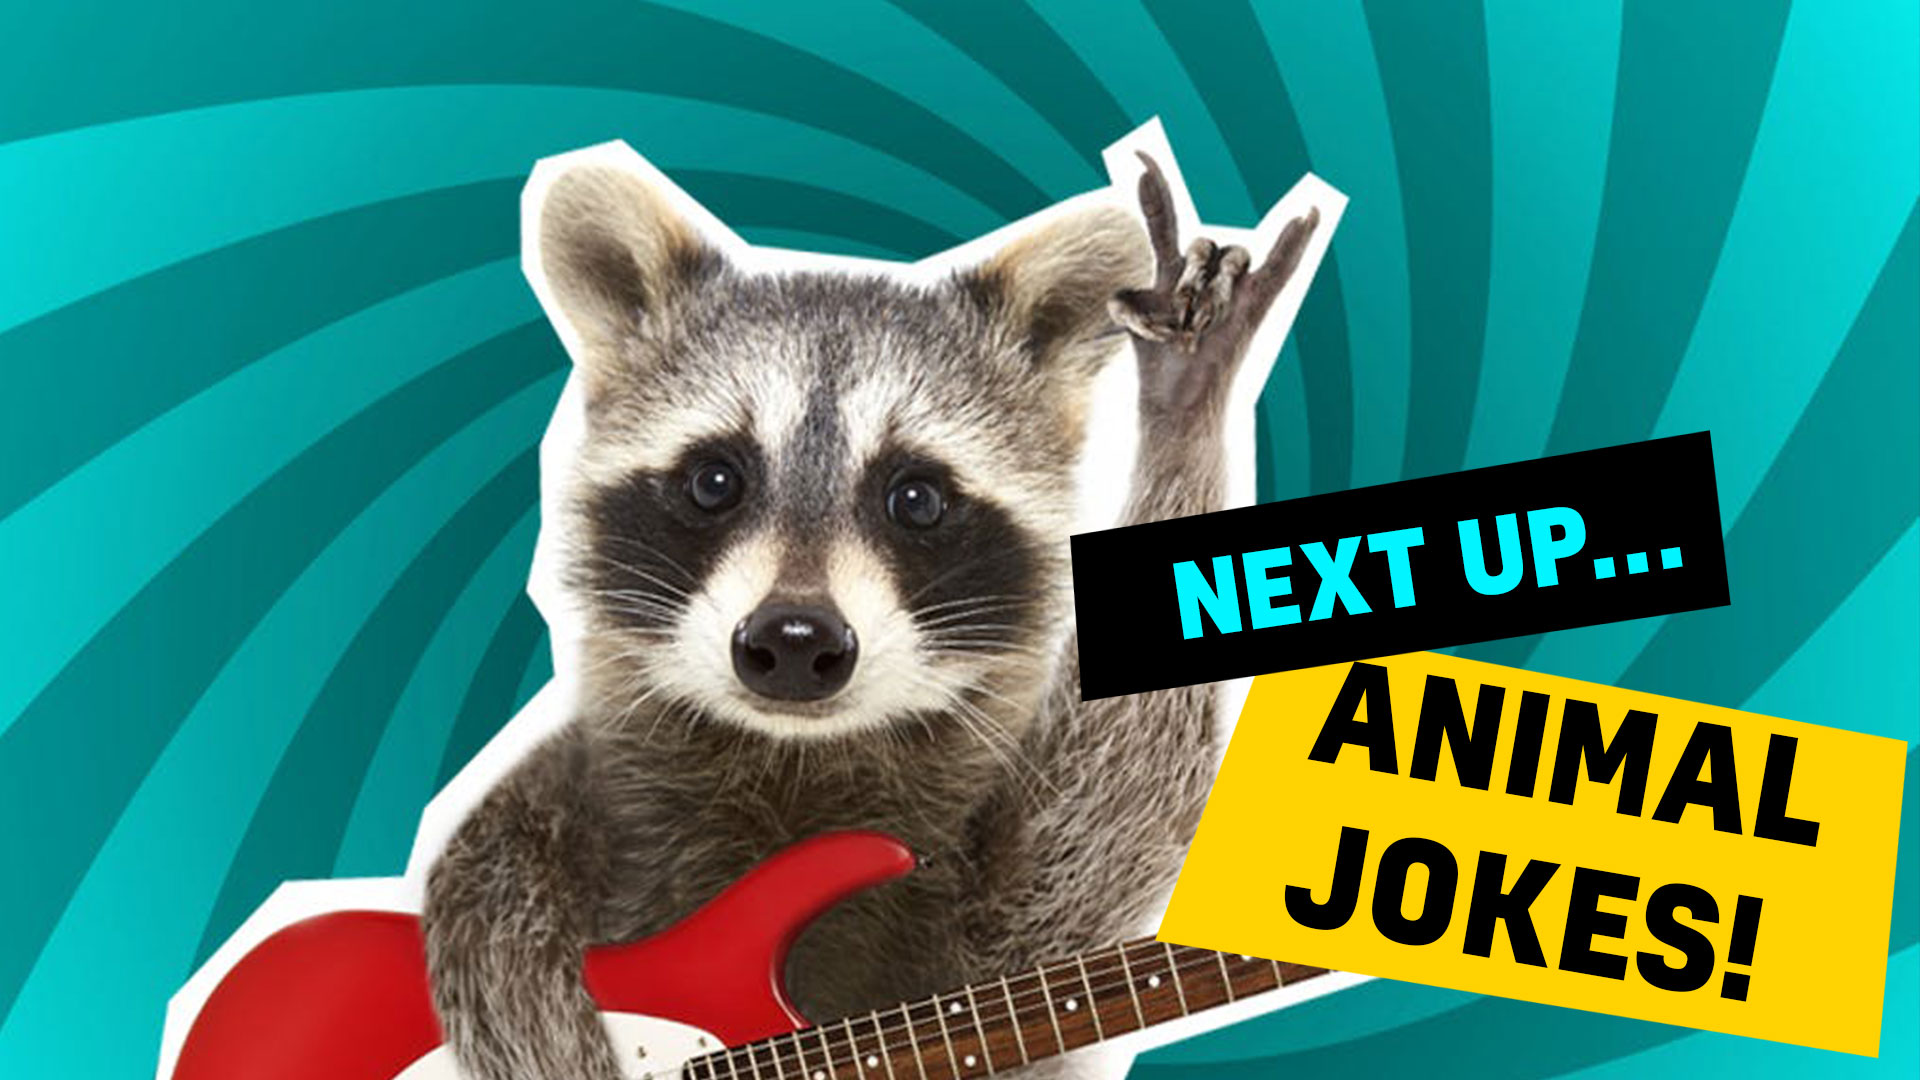 A racoon plays the guitar while you enjoy our animal jokes